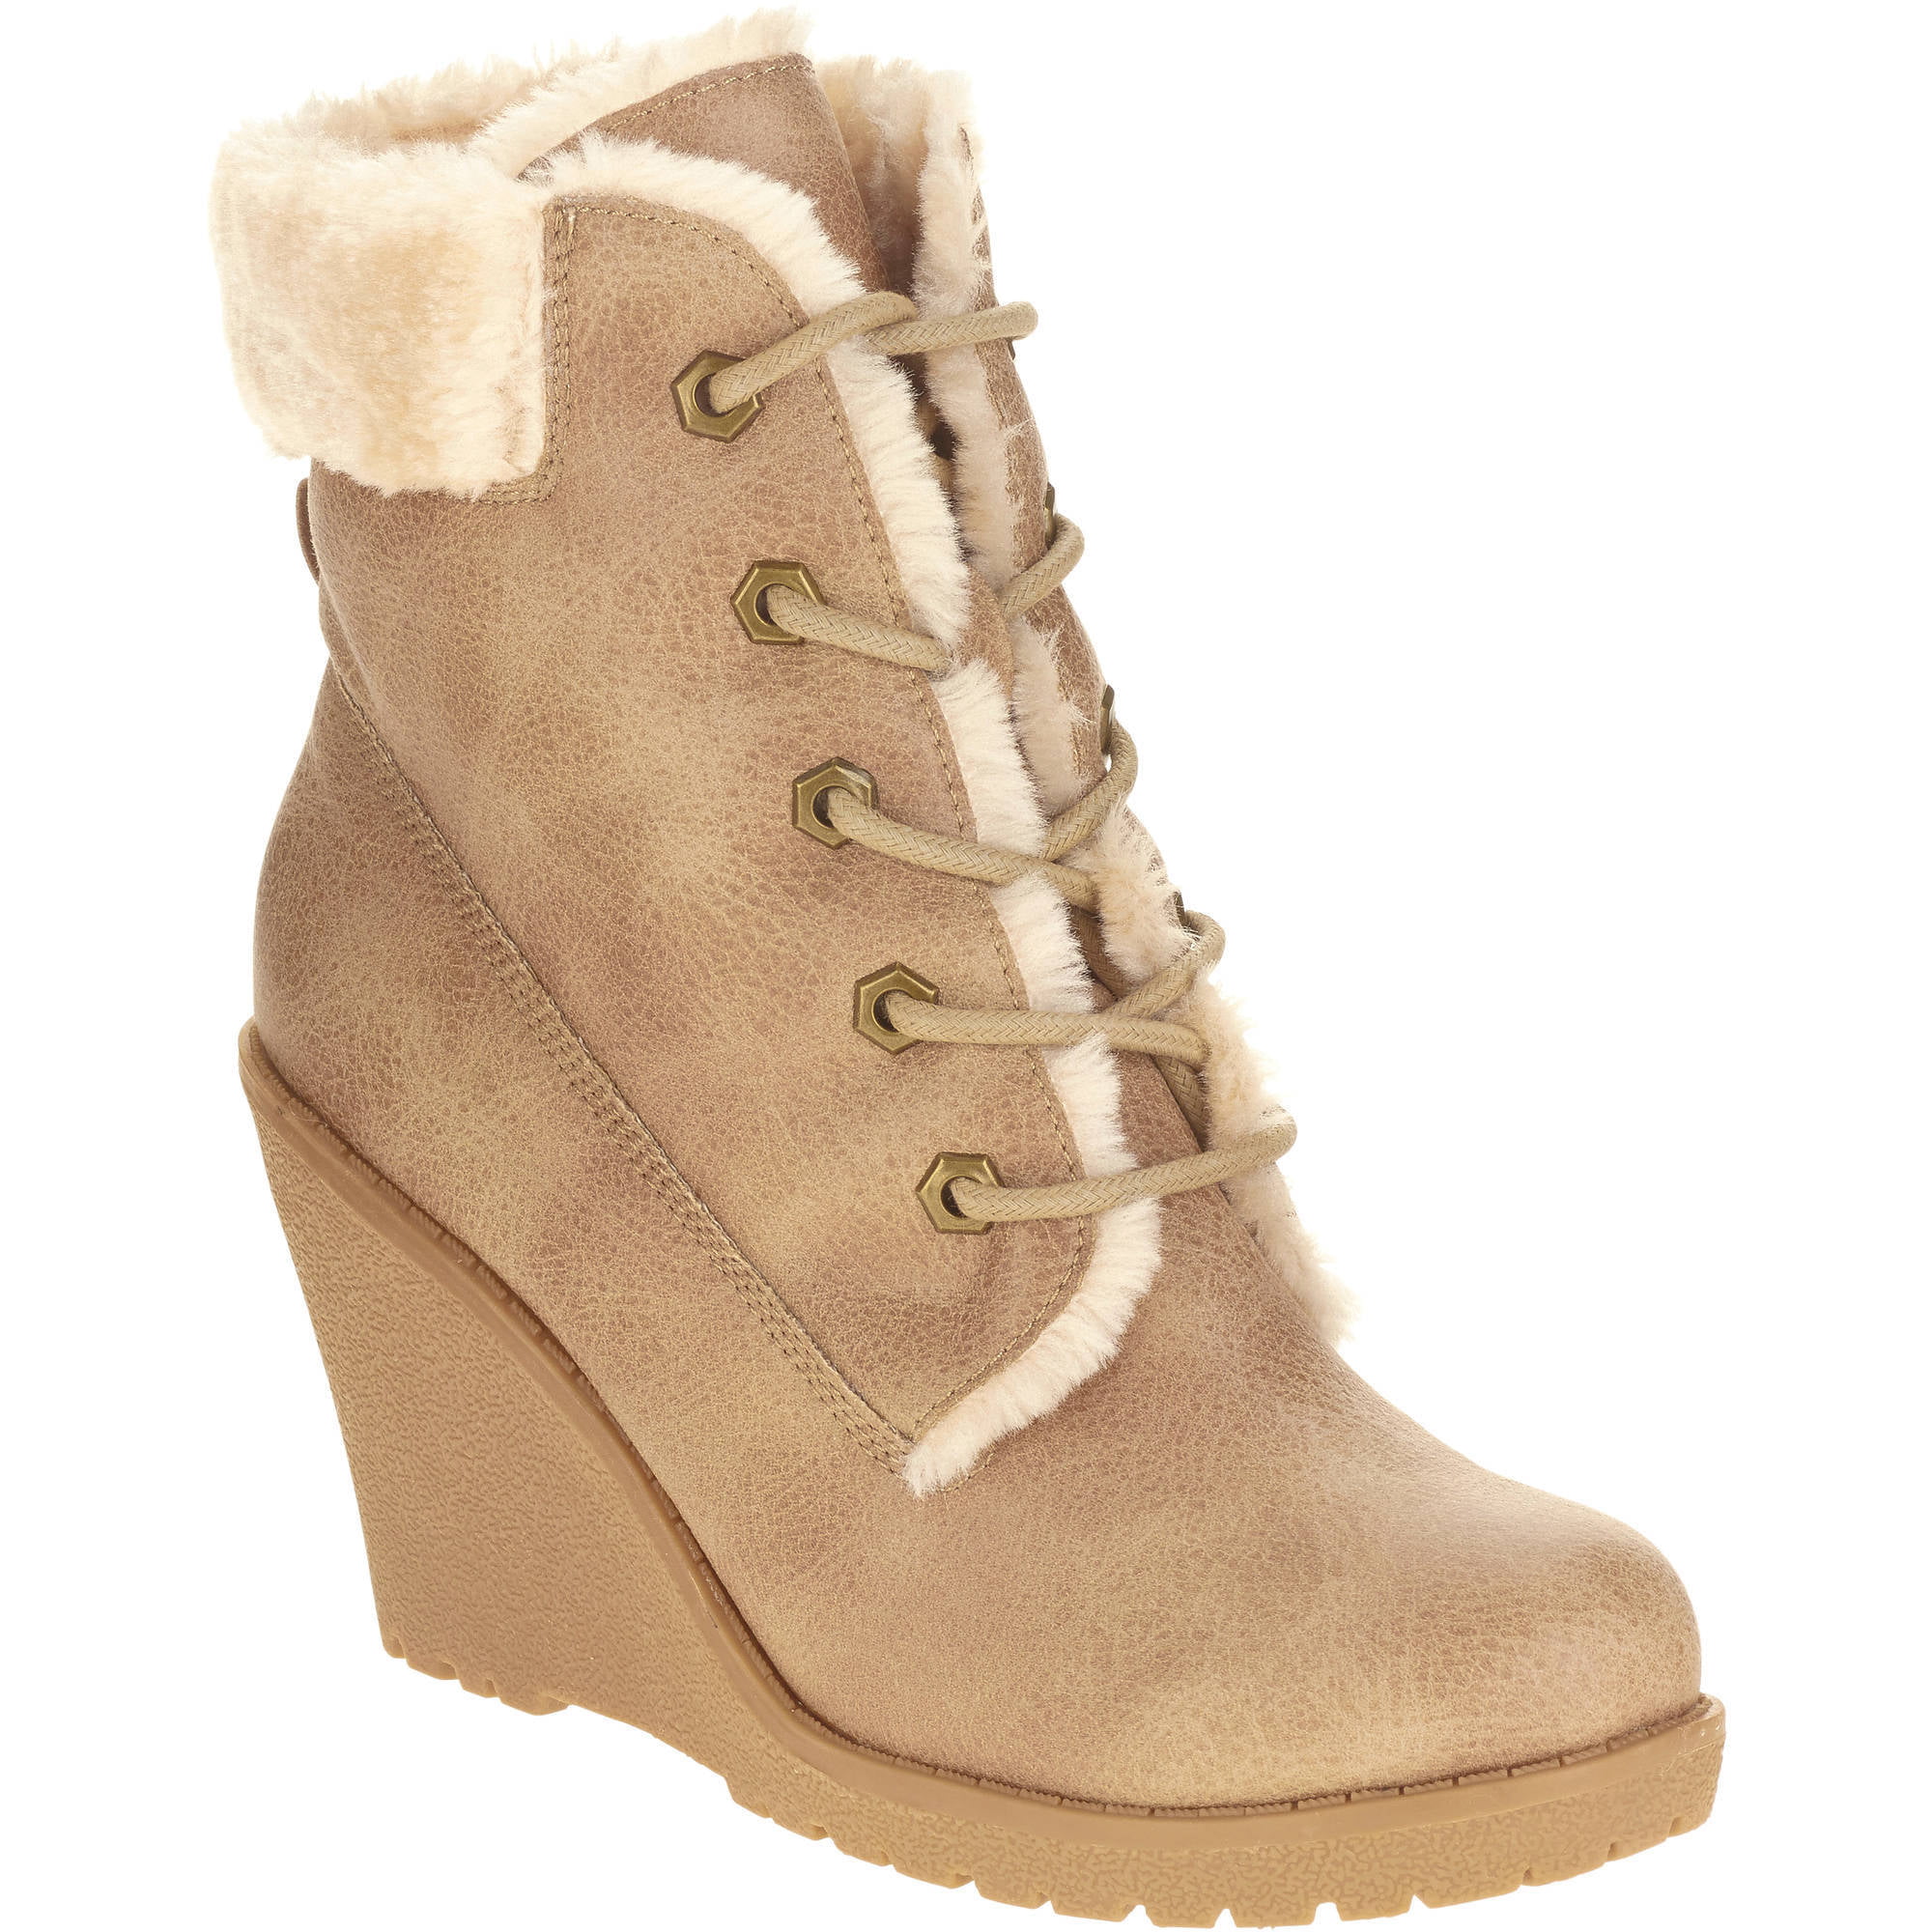 MOMO Women's Wedge Ankle Boot with Laces and Faux Fur Cuff - Walmart.com